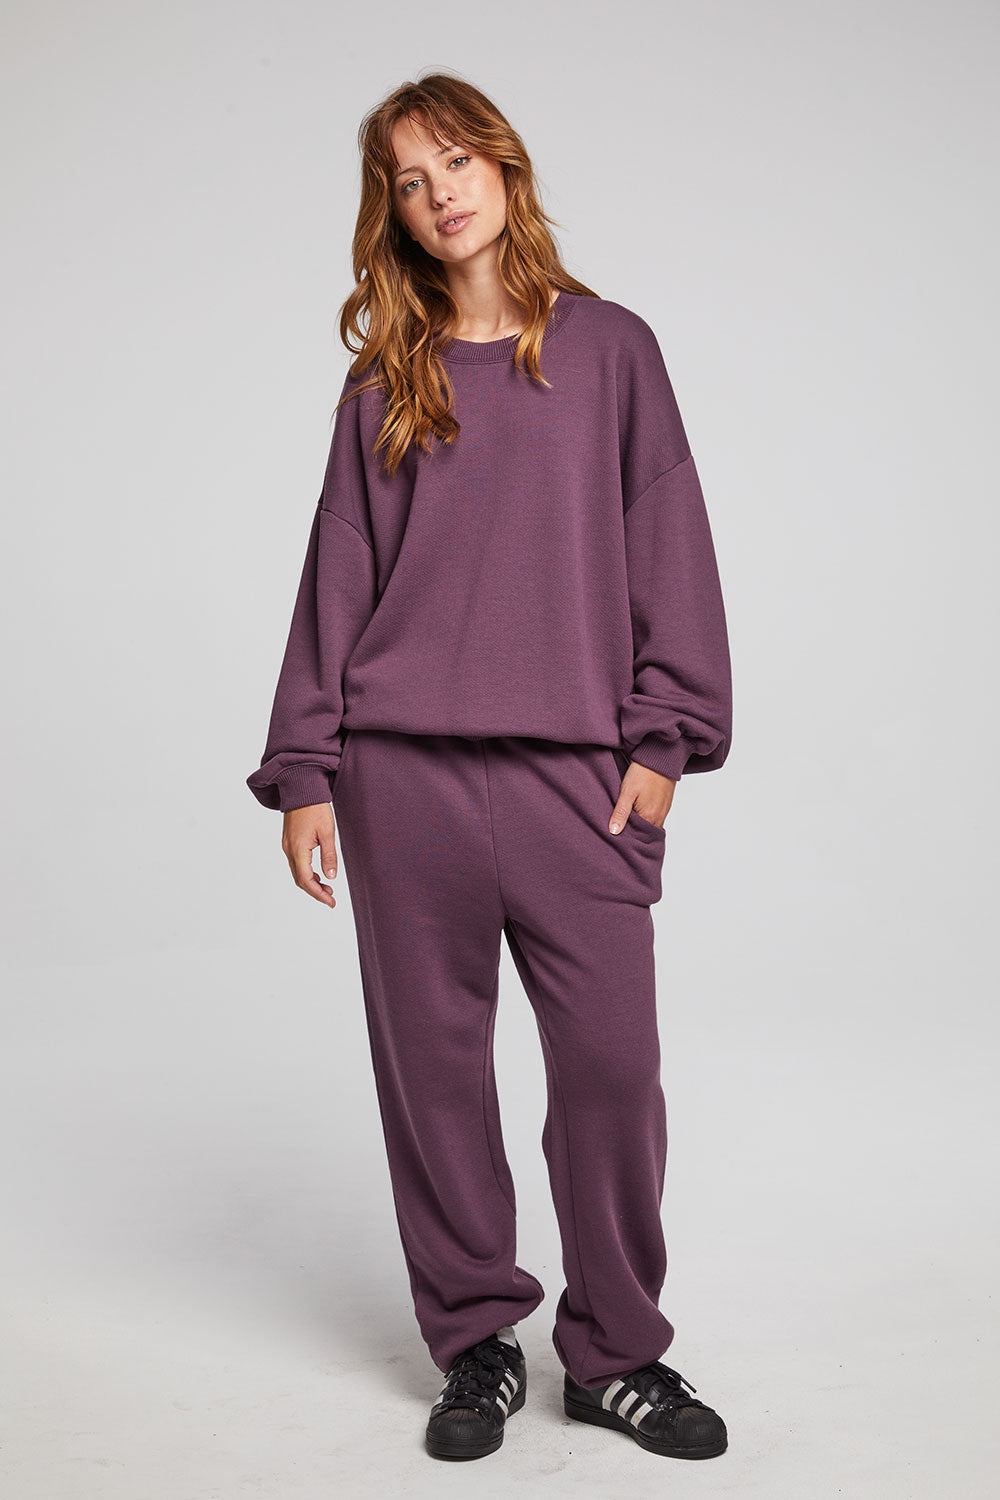 chaser-casbah-plum-pullover-05